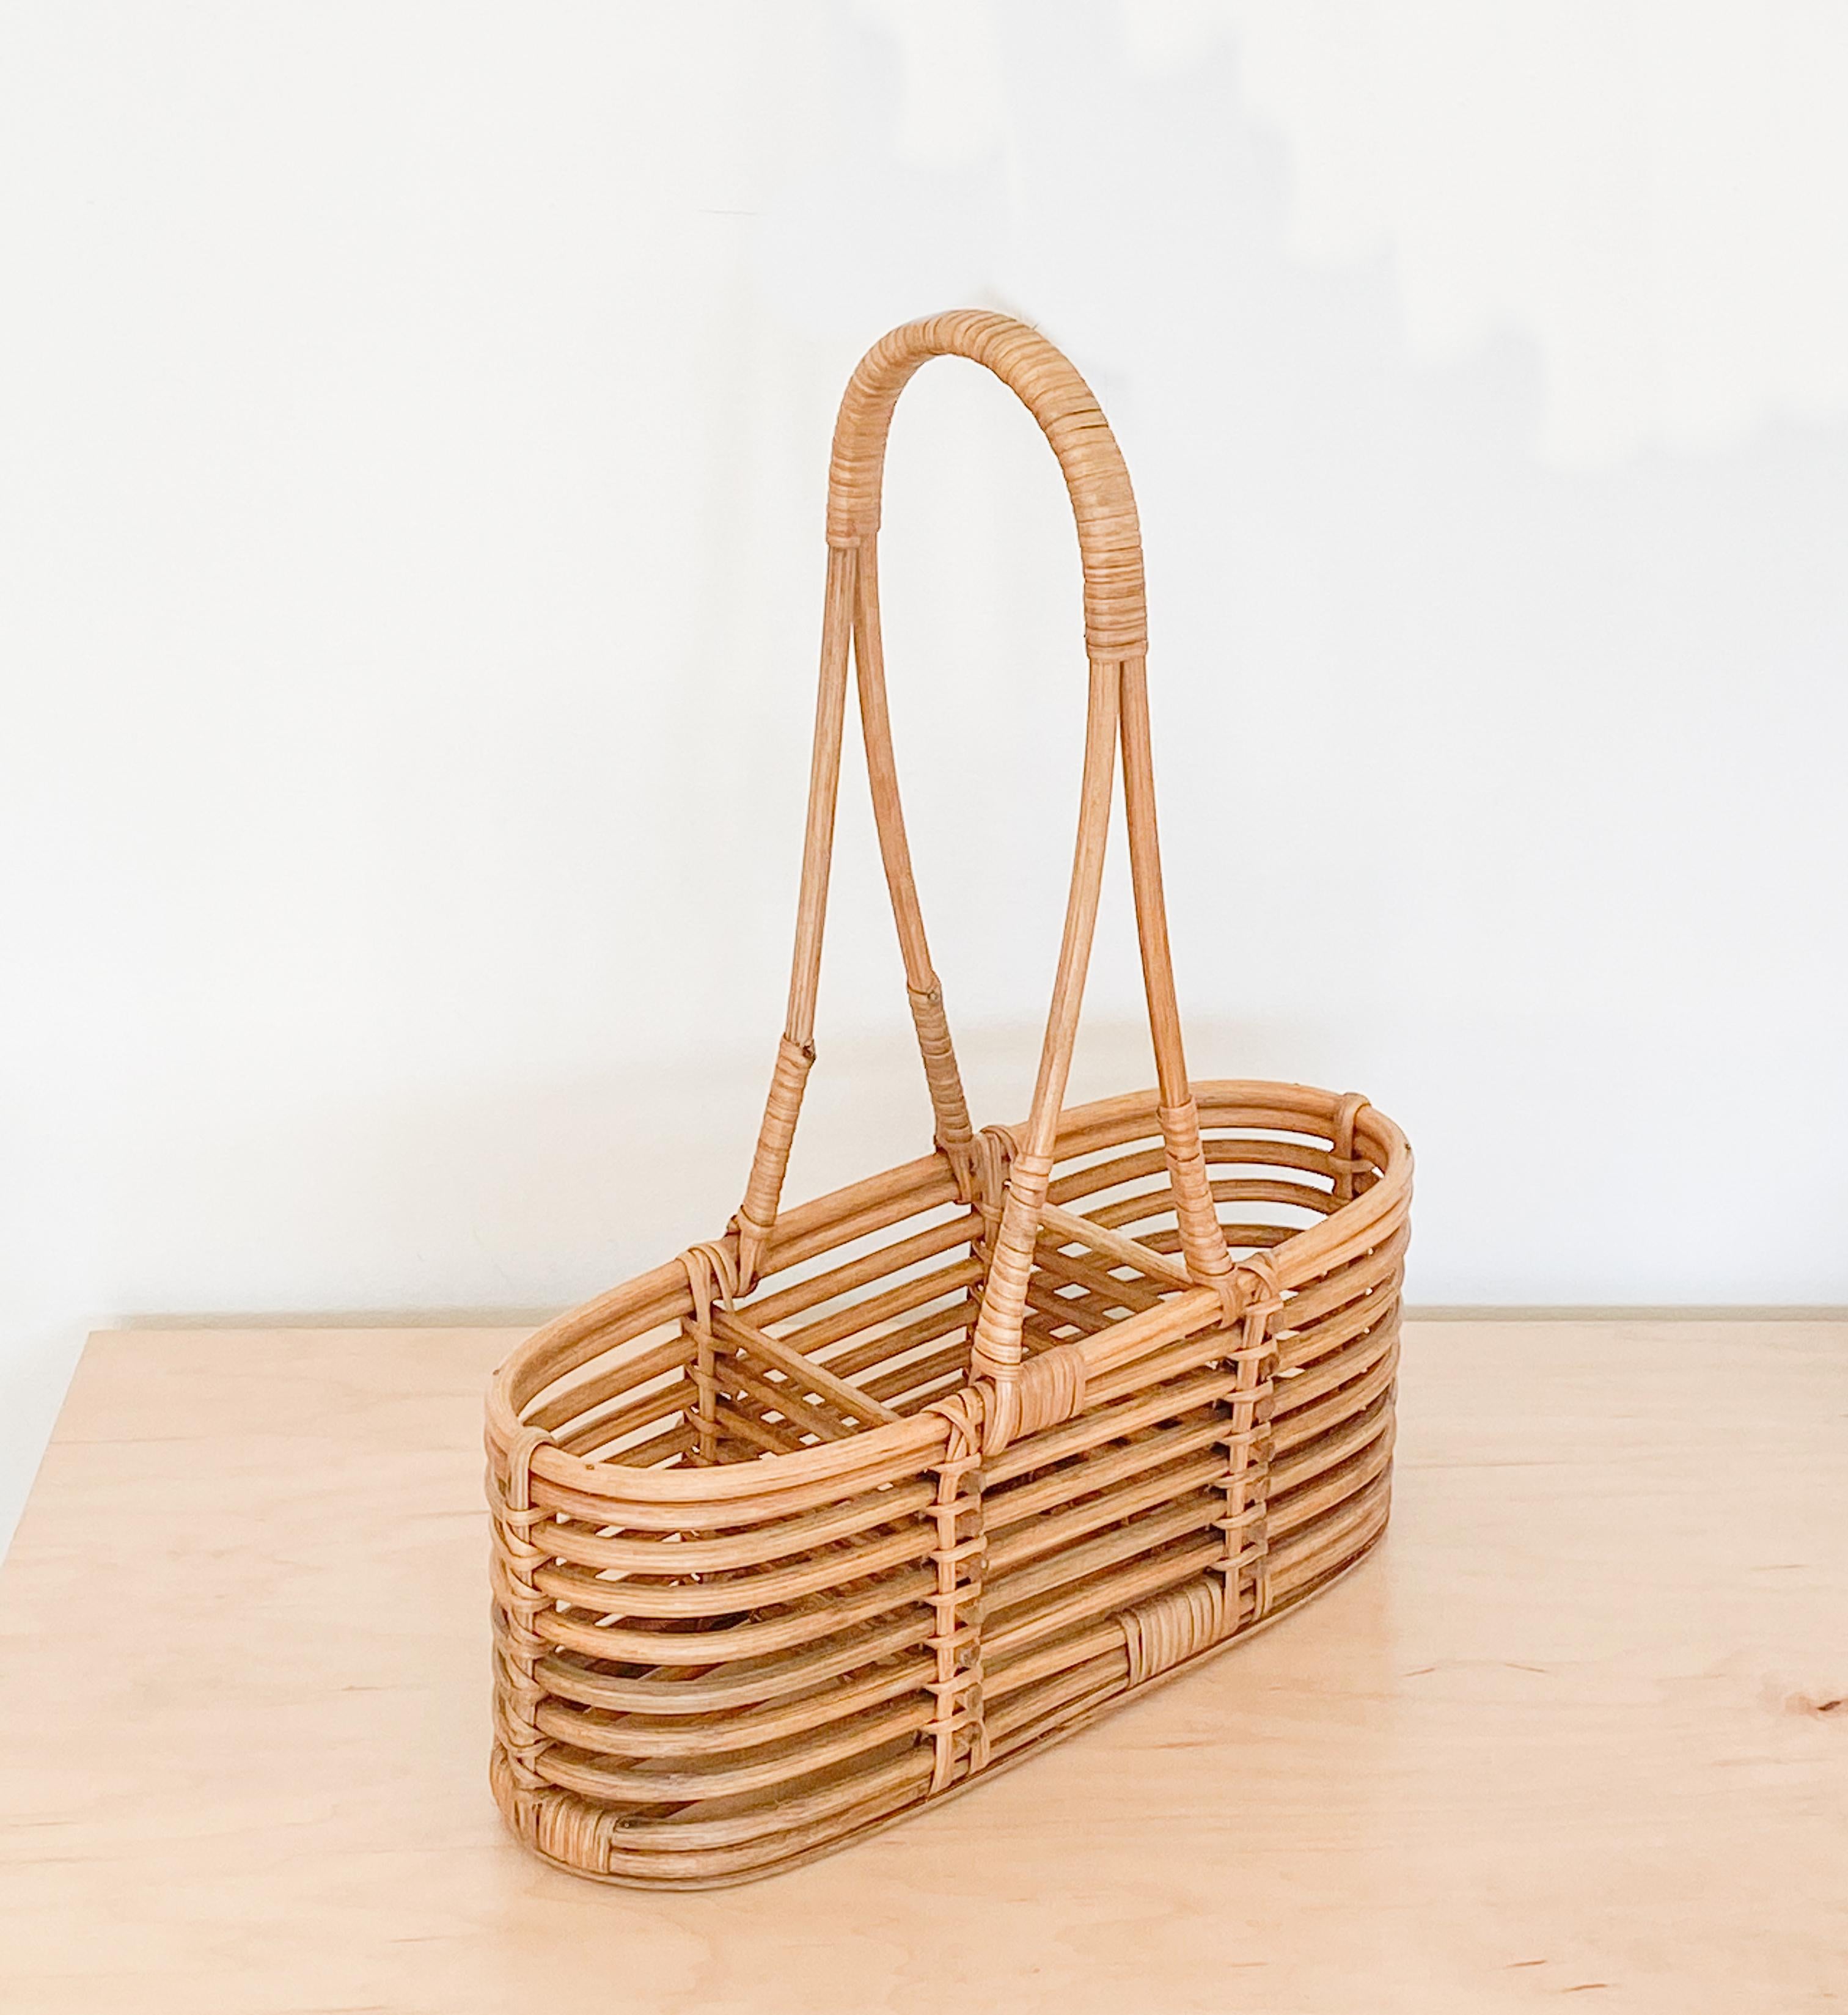 French rattan bottle holder with three compartments and carrying handle. Great original finish. Perfect for bottle display or to carry wine on-the-go.